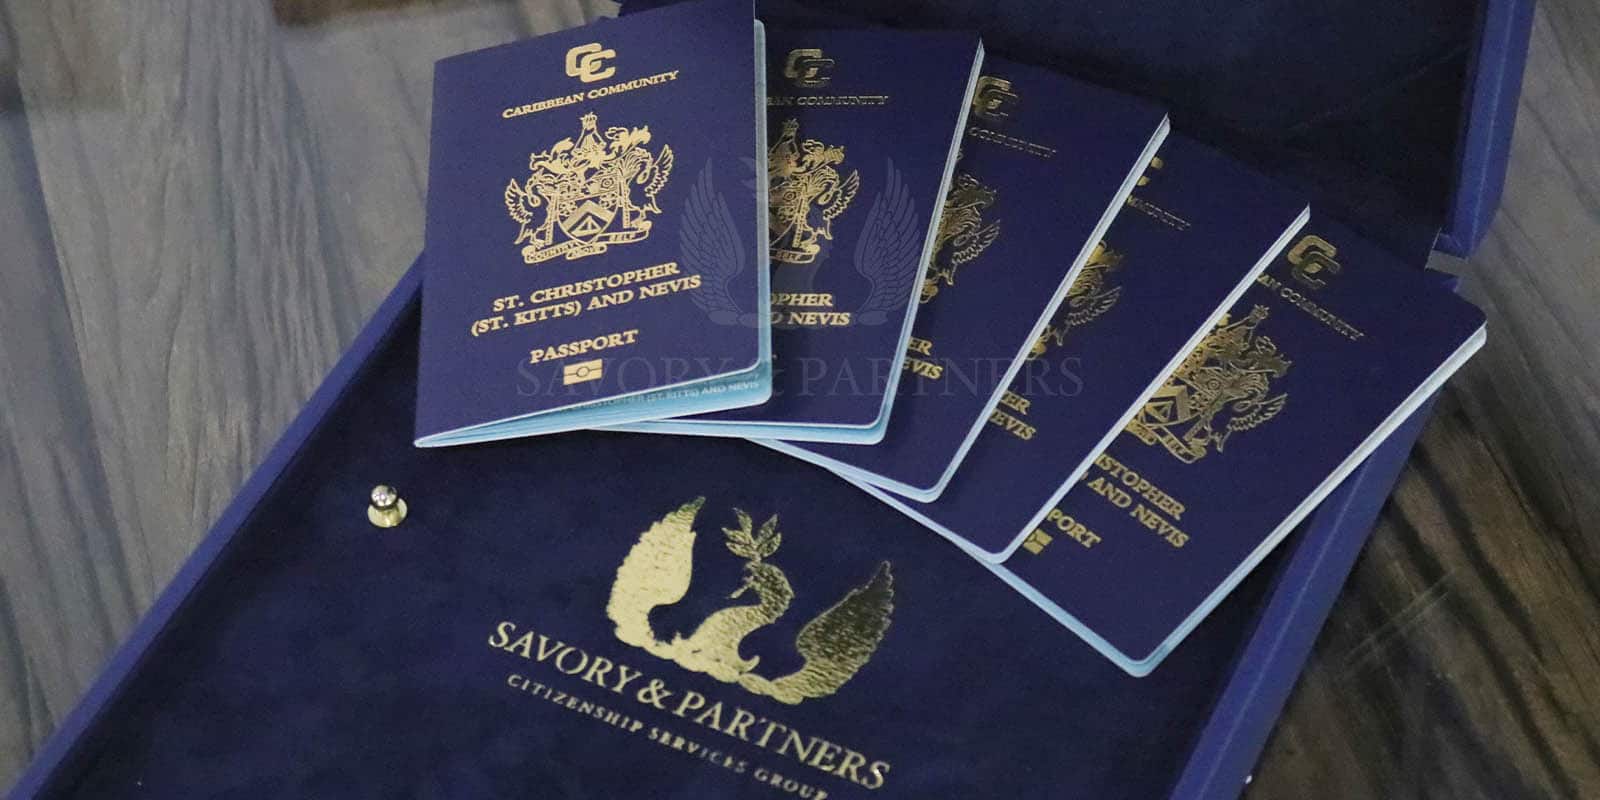 Who Can Get Citizenship and Passport for St Kitts and Nevis? Second